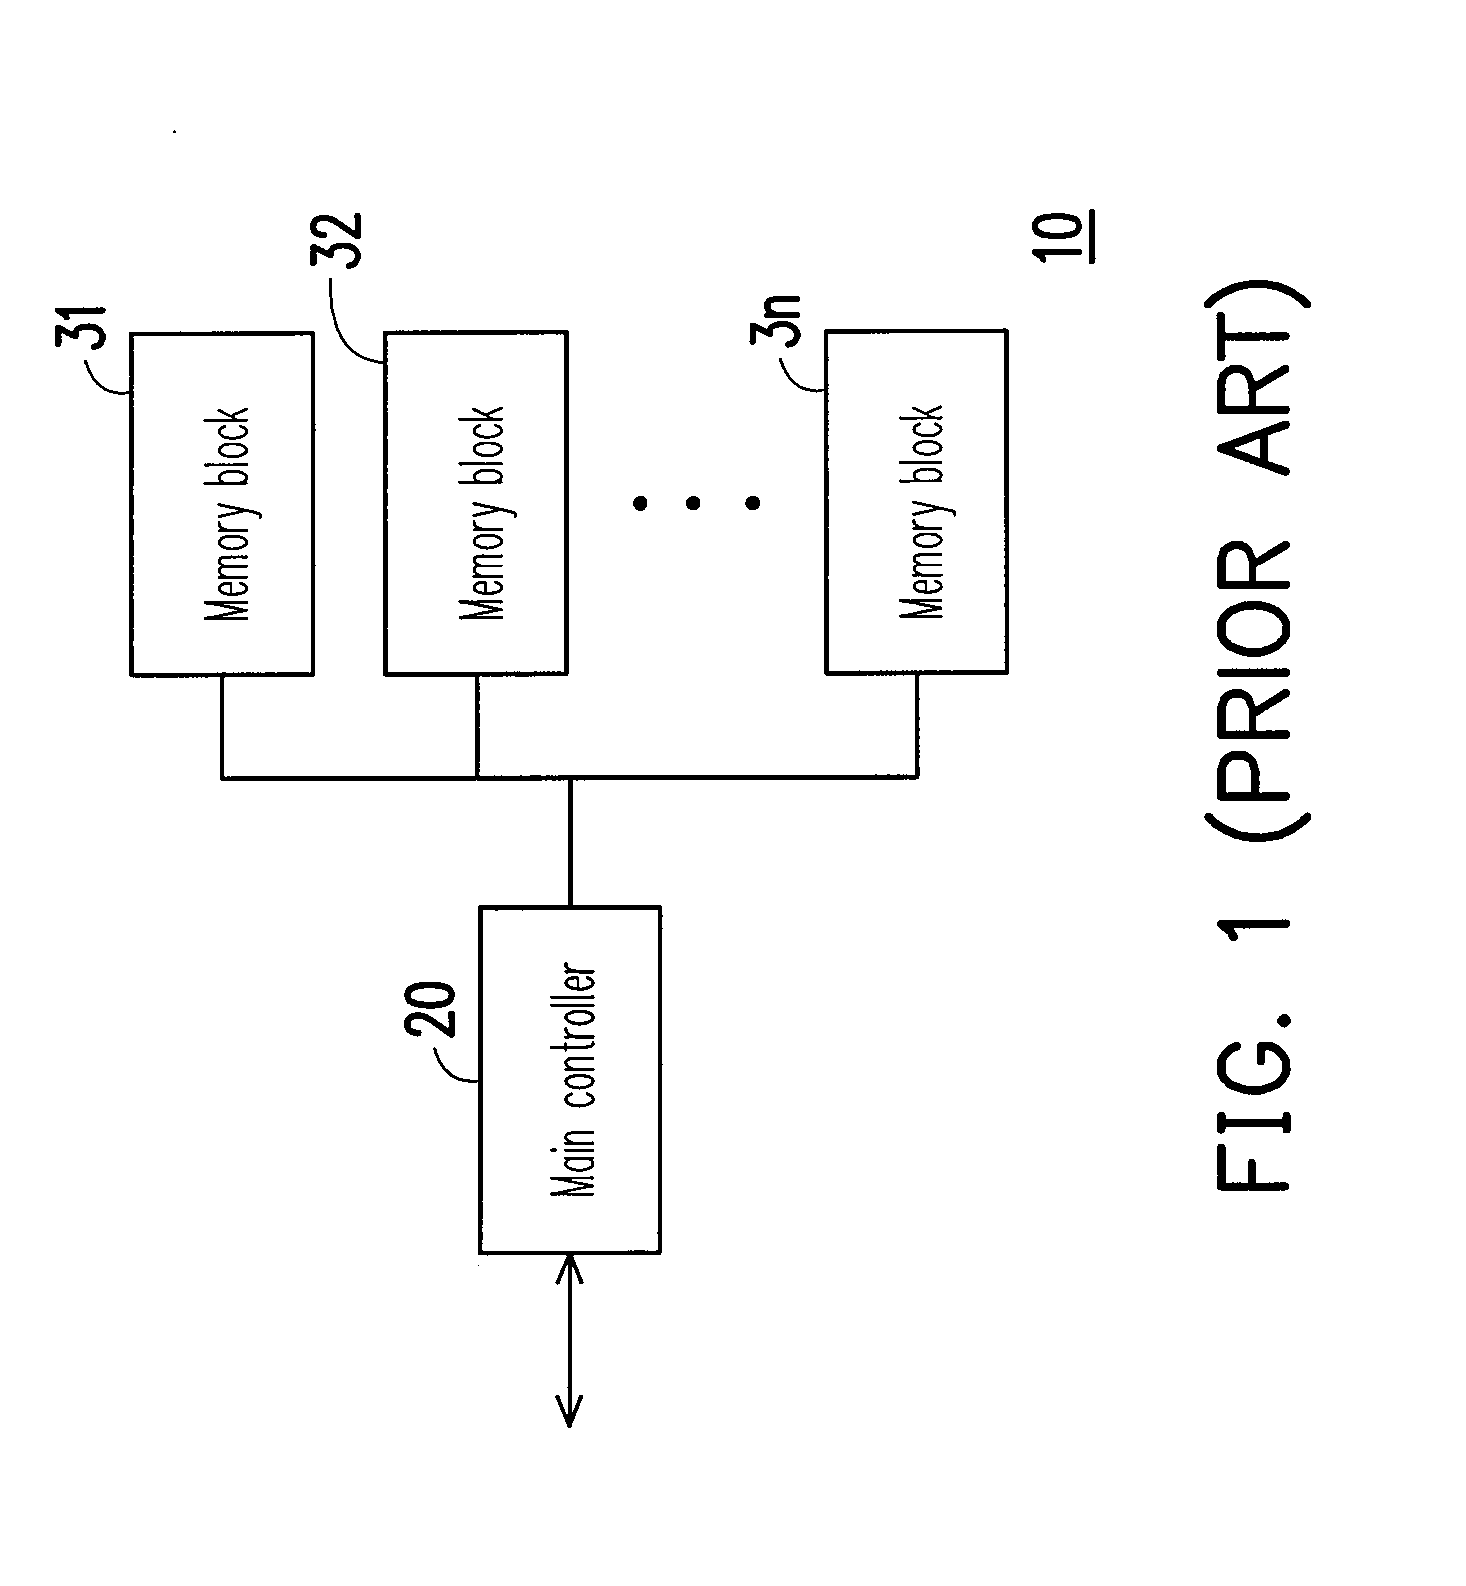 Non-volatile memory device and data access circuit and data access method